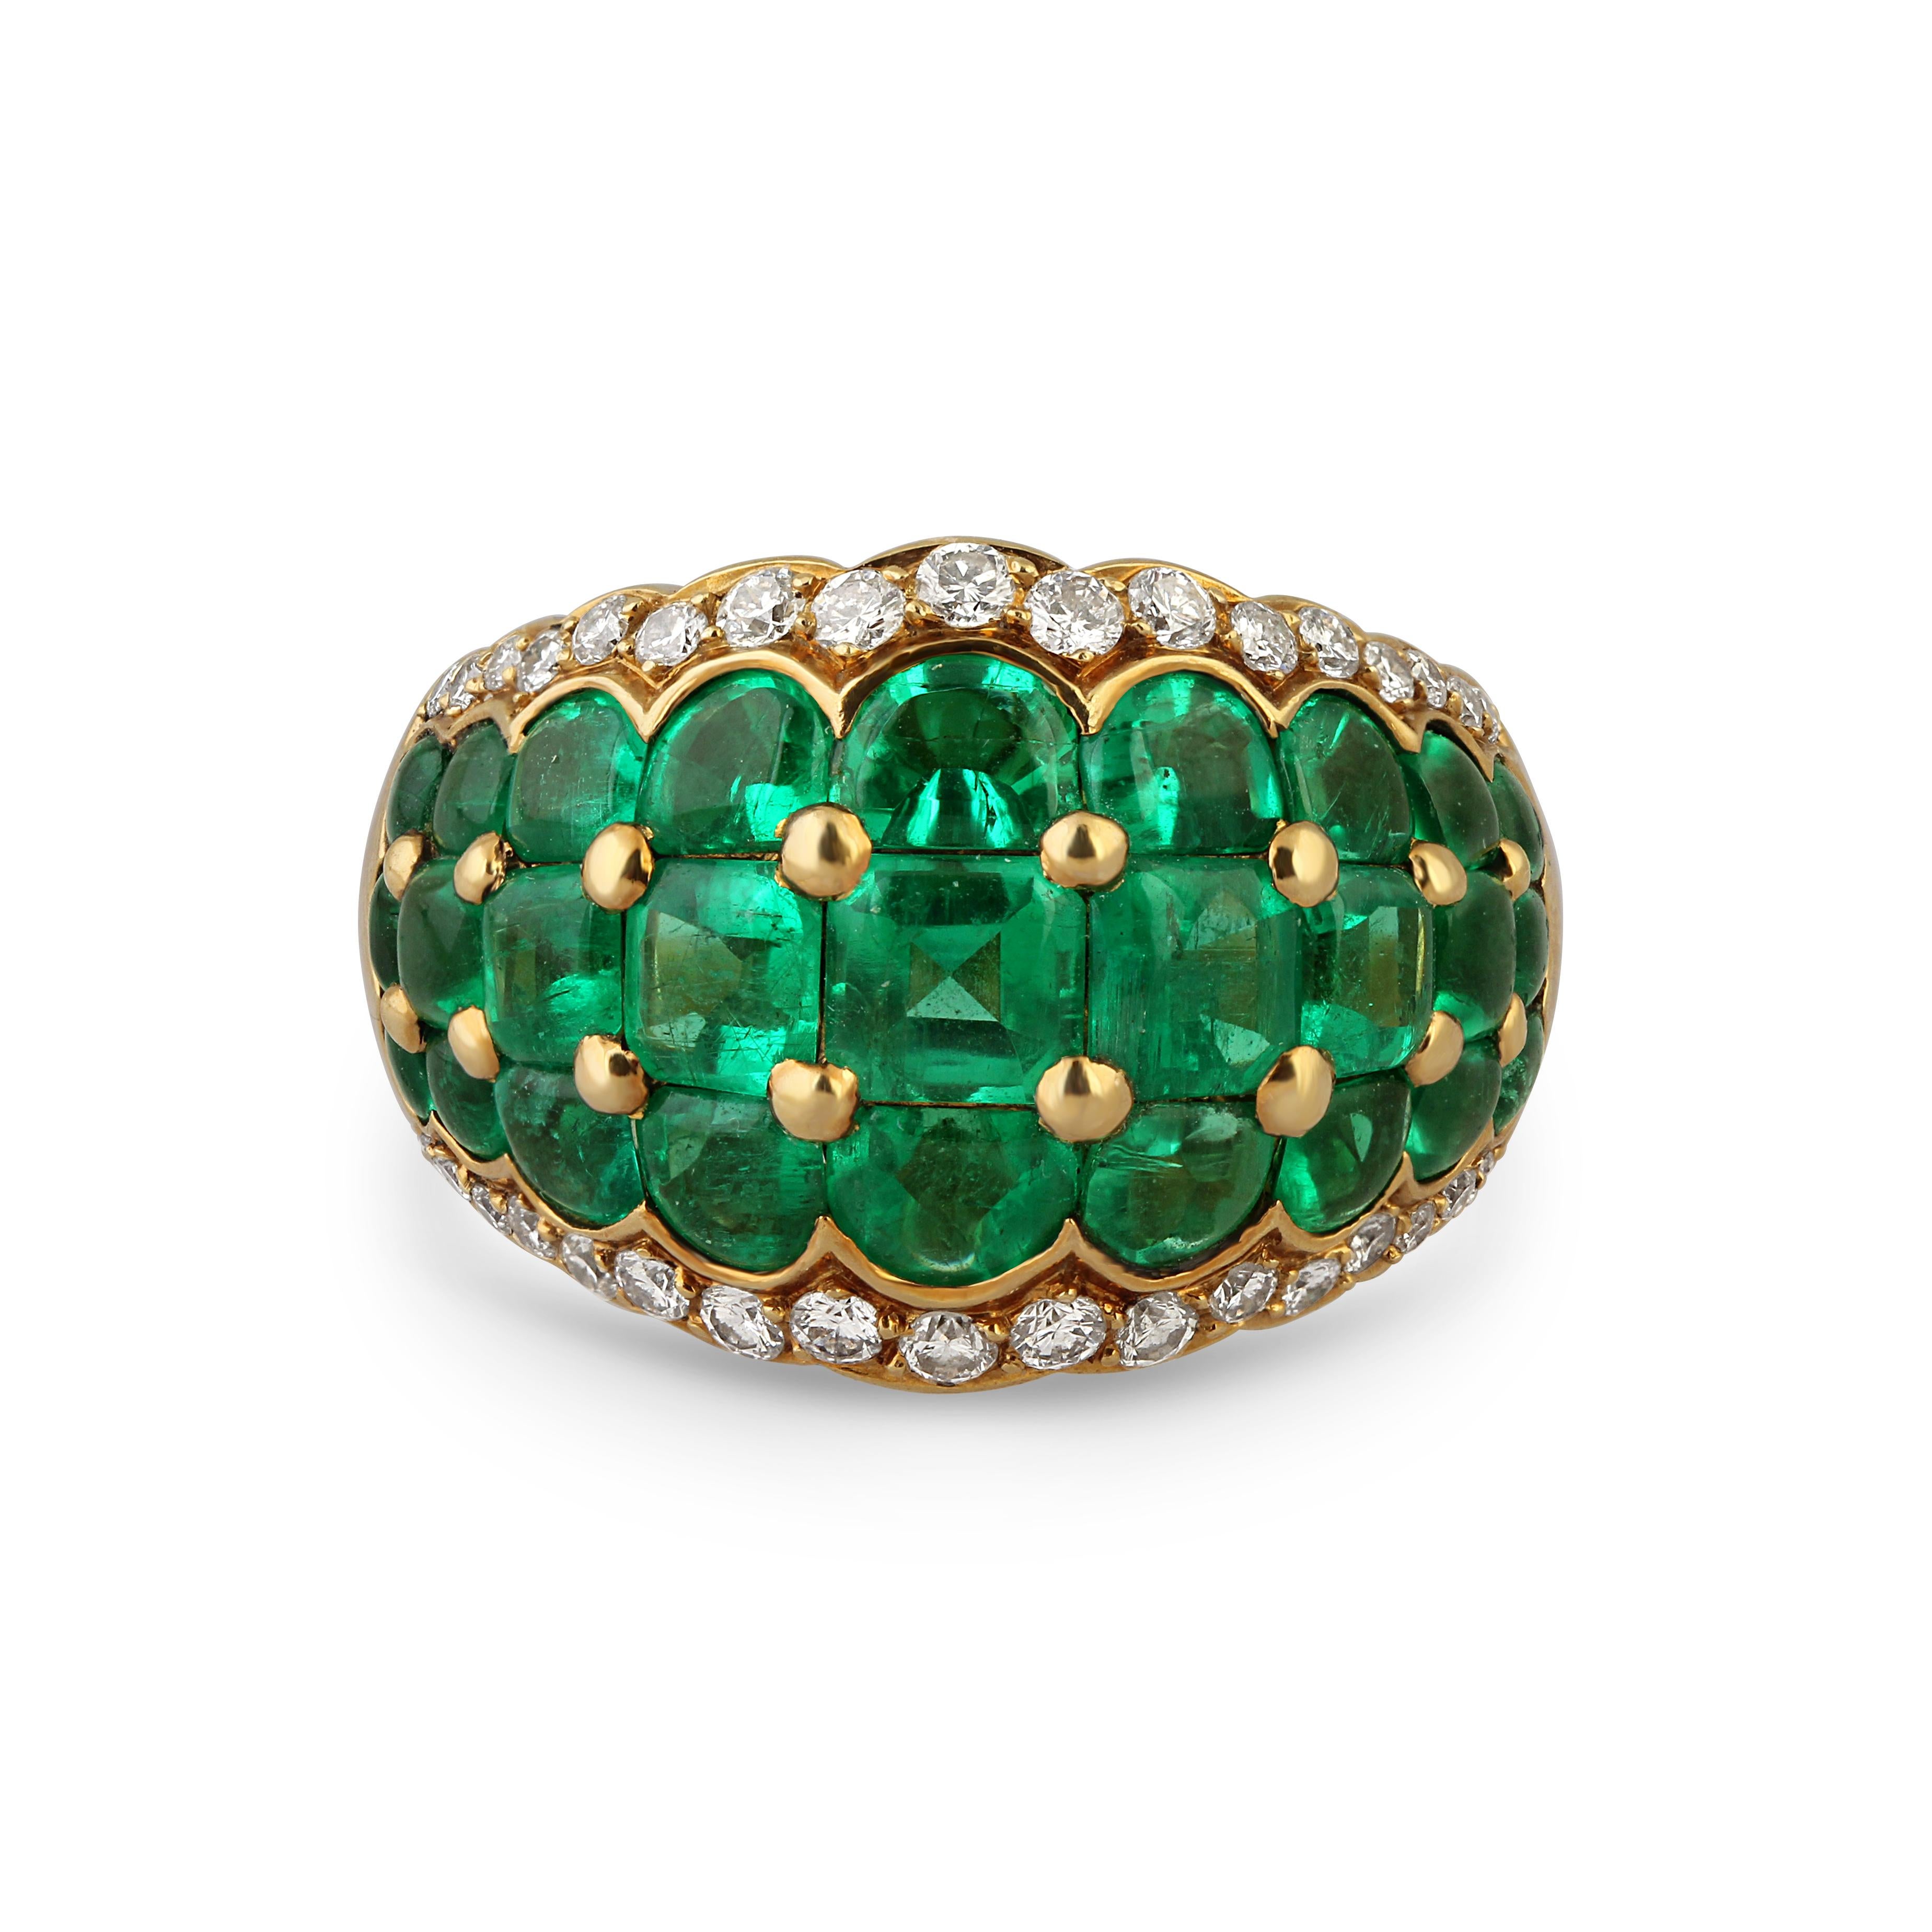 An 18k gold diamond and emerald ring, apx 4.50cts of emeralds.

Size: L
Weight: 13gr
Origin: French
